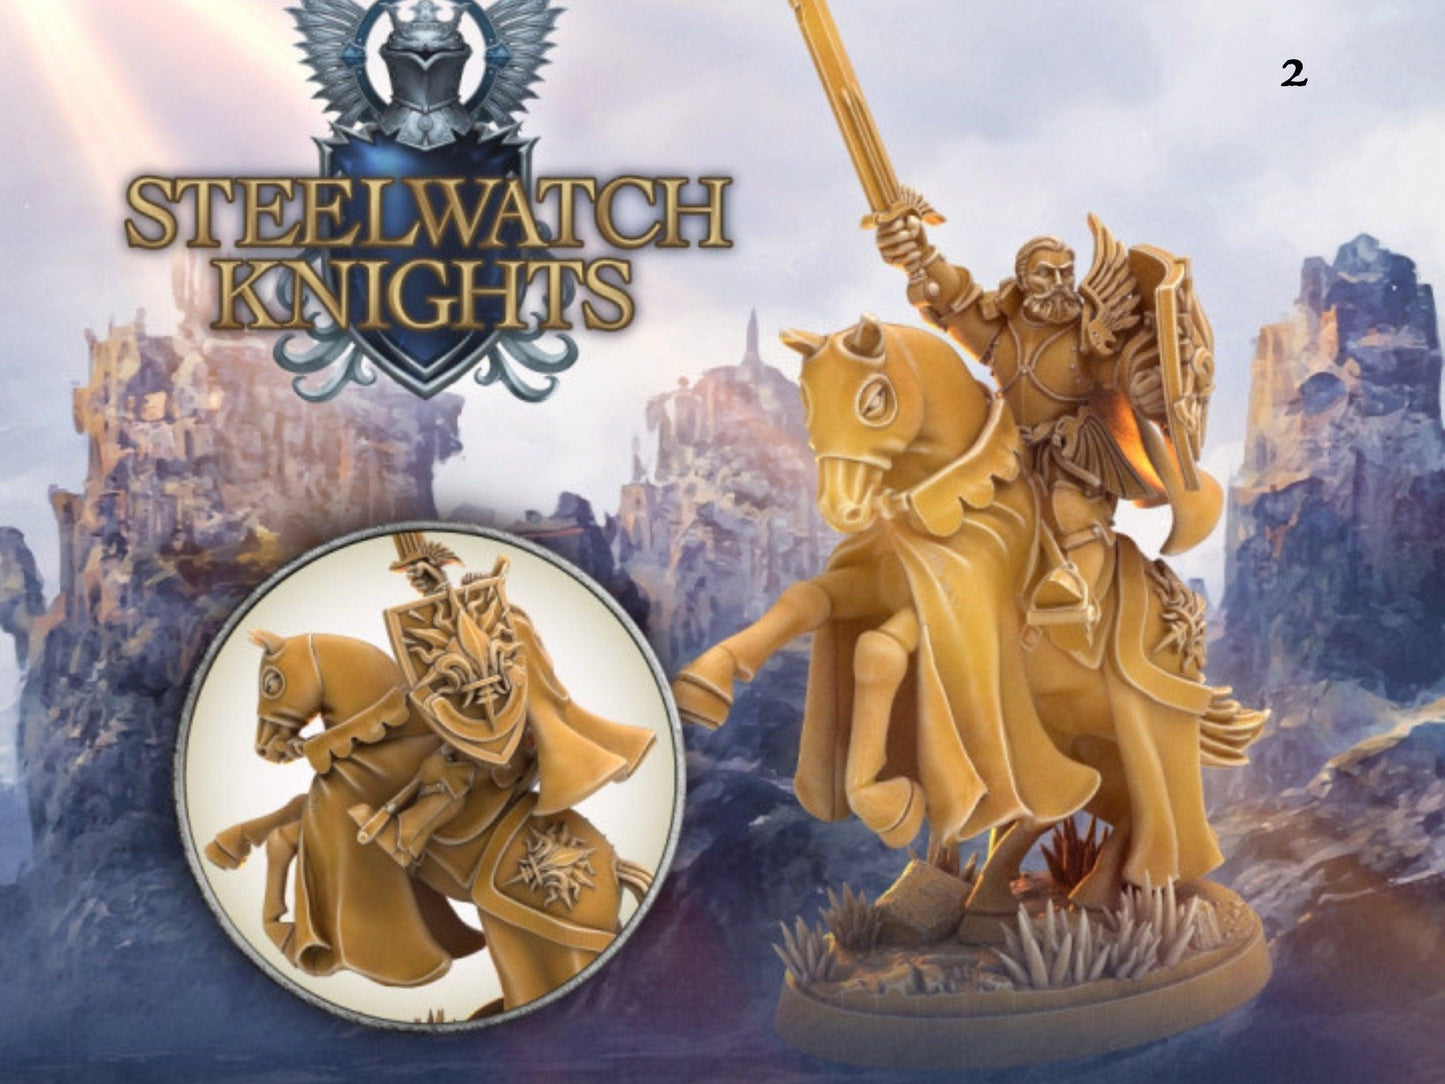 Mounted Paladin miniature Steelwatch | Dragon's Forge | 28mm Scale | DnD Miniature | Dungeons and Dragons | Female Paladin knight - Plague Miniatures shop for DnD Miniatures